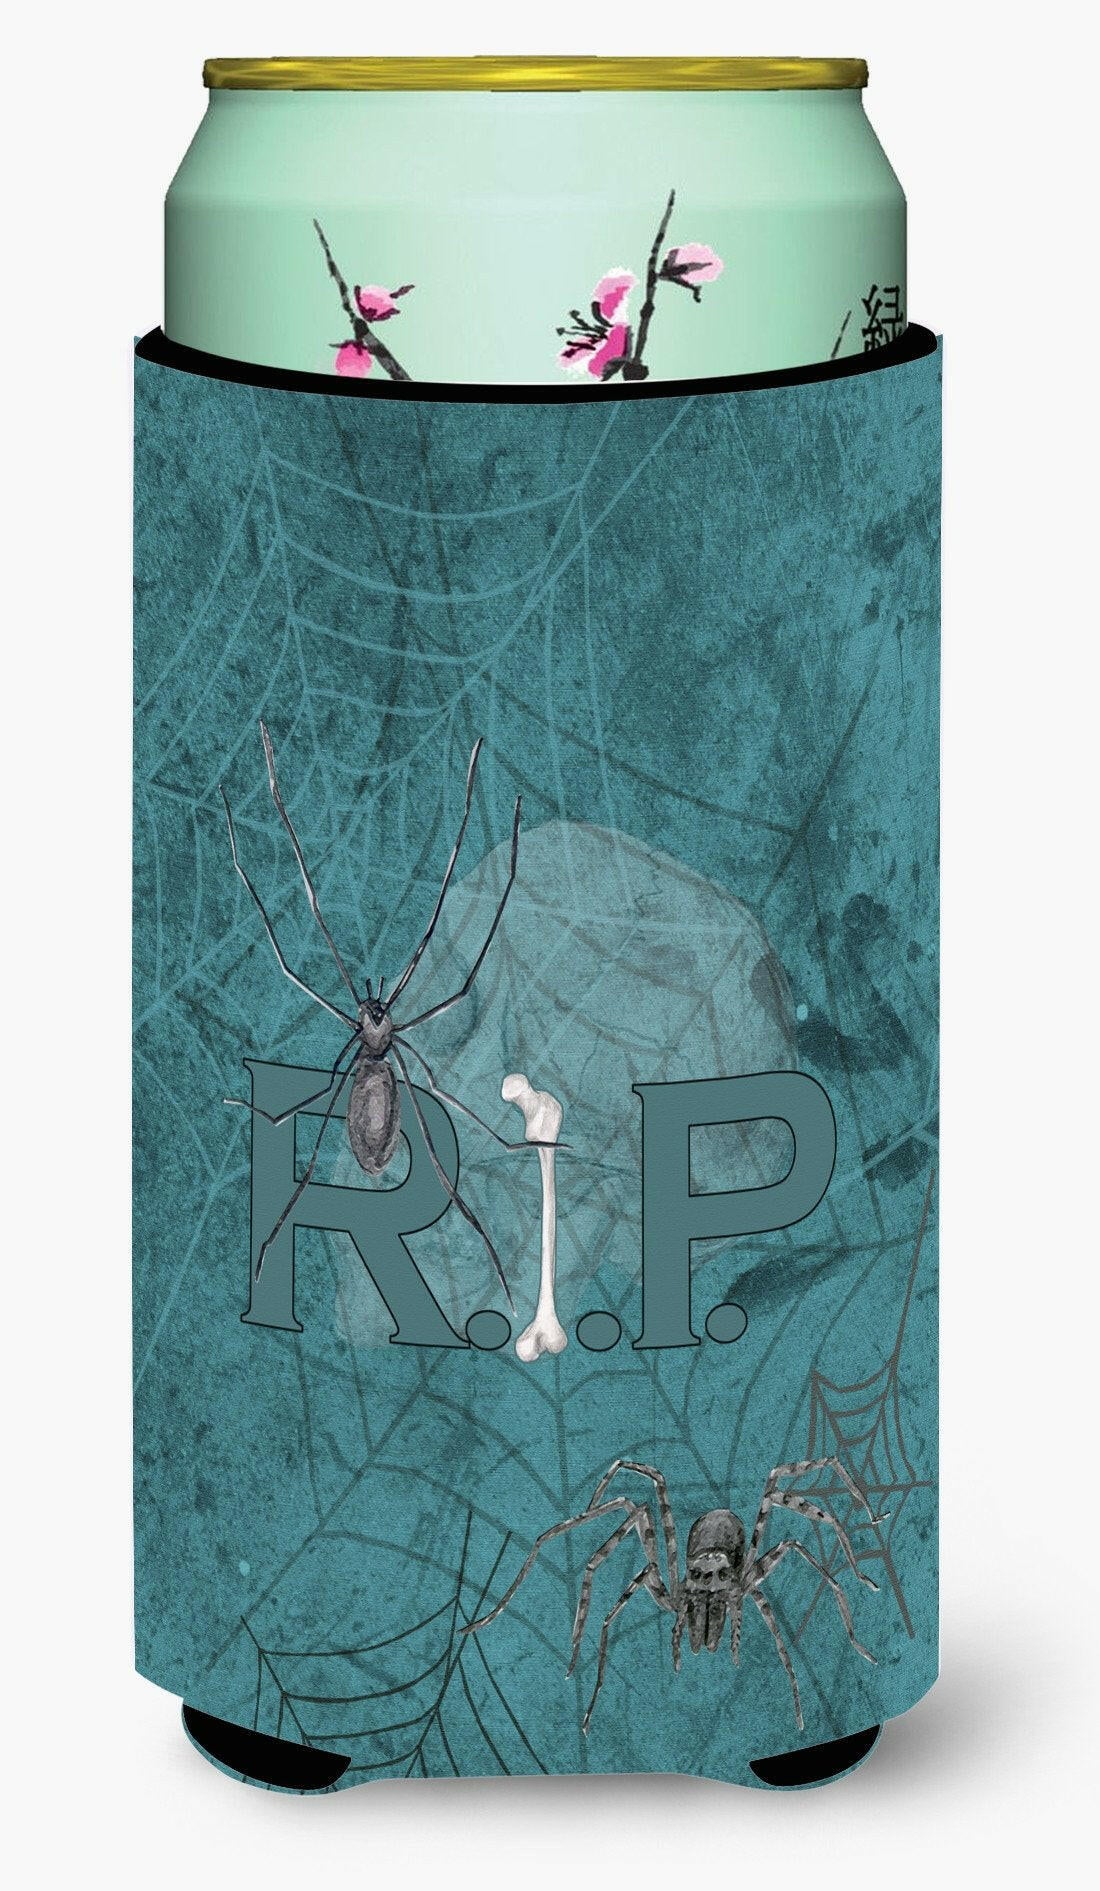 RIP Rest in Peace with spider web Halloween  Tall Boy Beverage Insulator Beverage Insulator Hugger by Caroline's Treasures